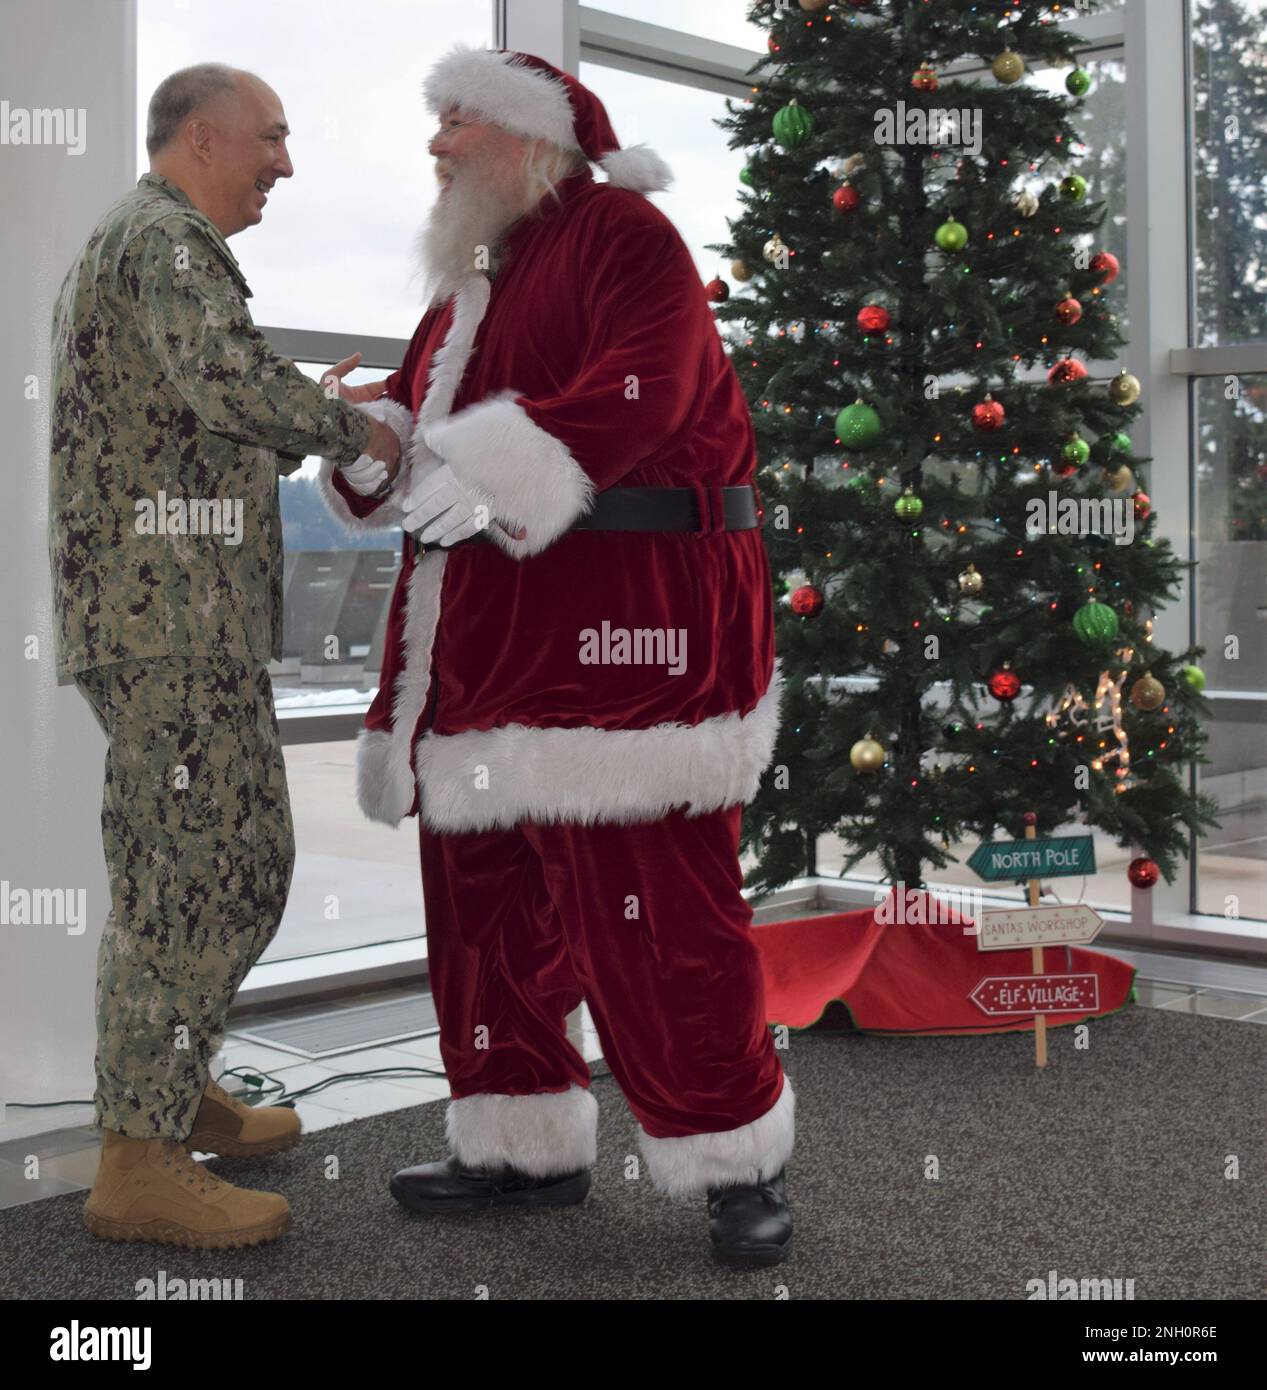 A welcoming Santa surprise at Naval Hospital Bremerton...Capt. Patrick Fitzpatrick, NHB director and Navy Medicine Readiness Training Command Bremerton commanding officer extends seasonal greetings with Santa, ably portrayed by Cris Larsen, standup comedian and noted local civic leader active with the Bremerton Chamber of Commerce Armed Forces Festival at the command's annual Tree Lighting ceremony, Dec. 5, 2022 (Official Navy photo by Douglas H Stutz, NHB/NMRTC Bremerton public affairs). Stock Photo